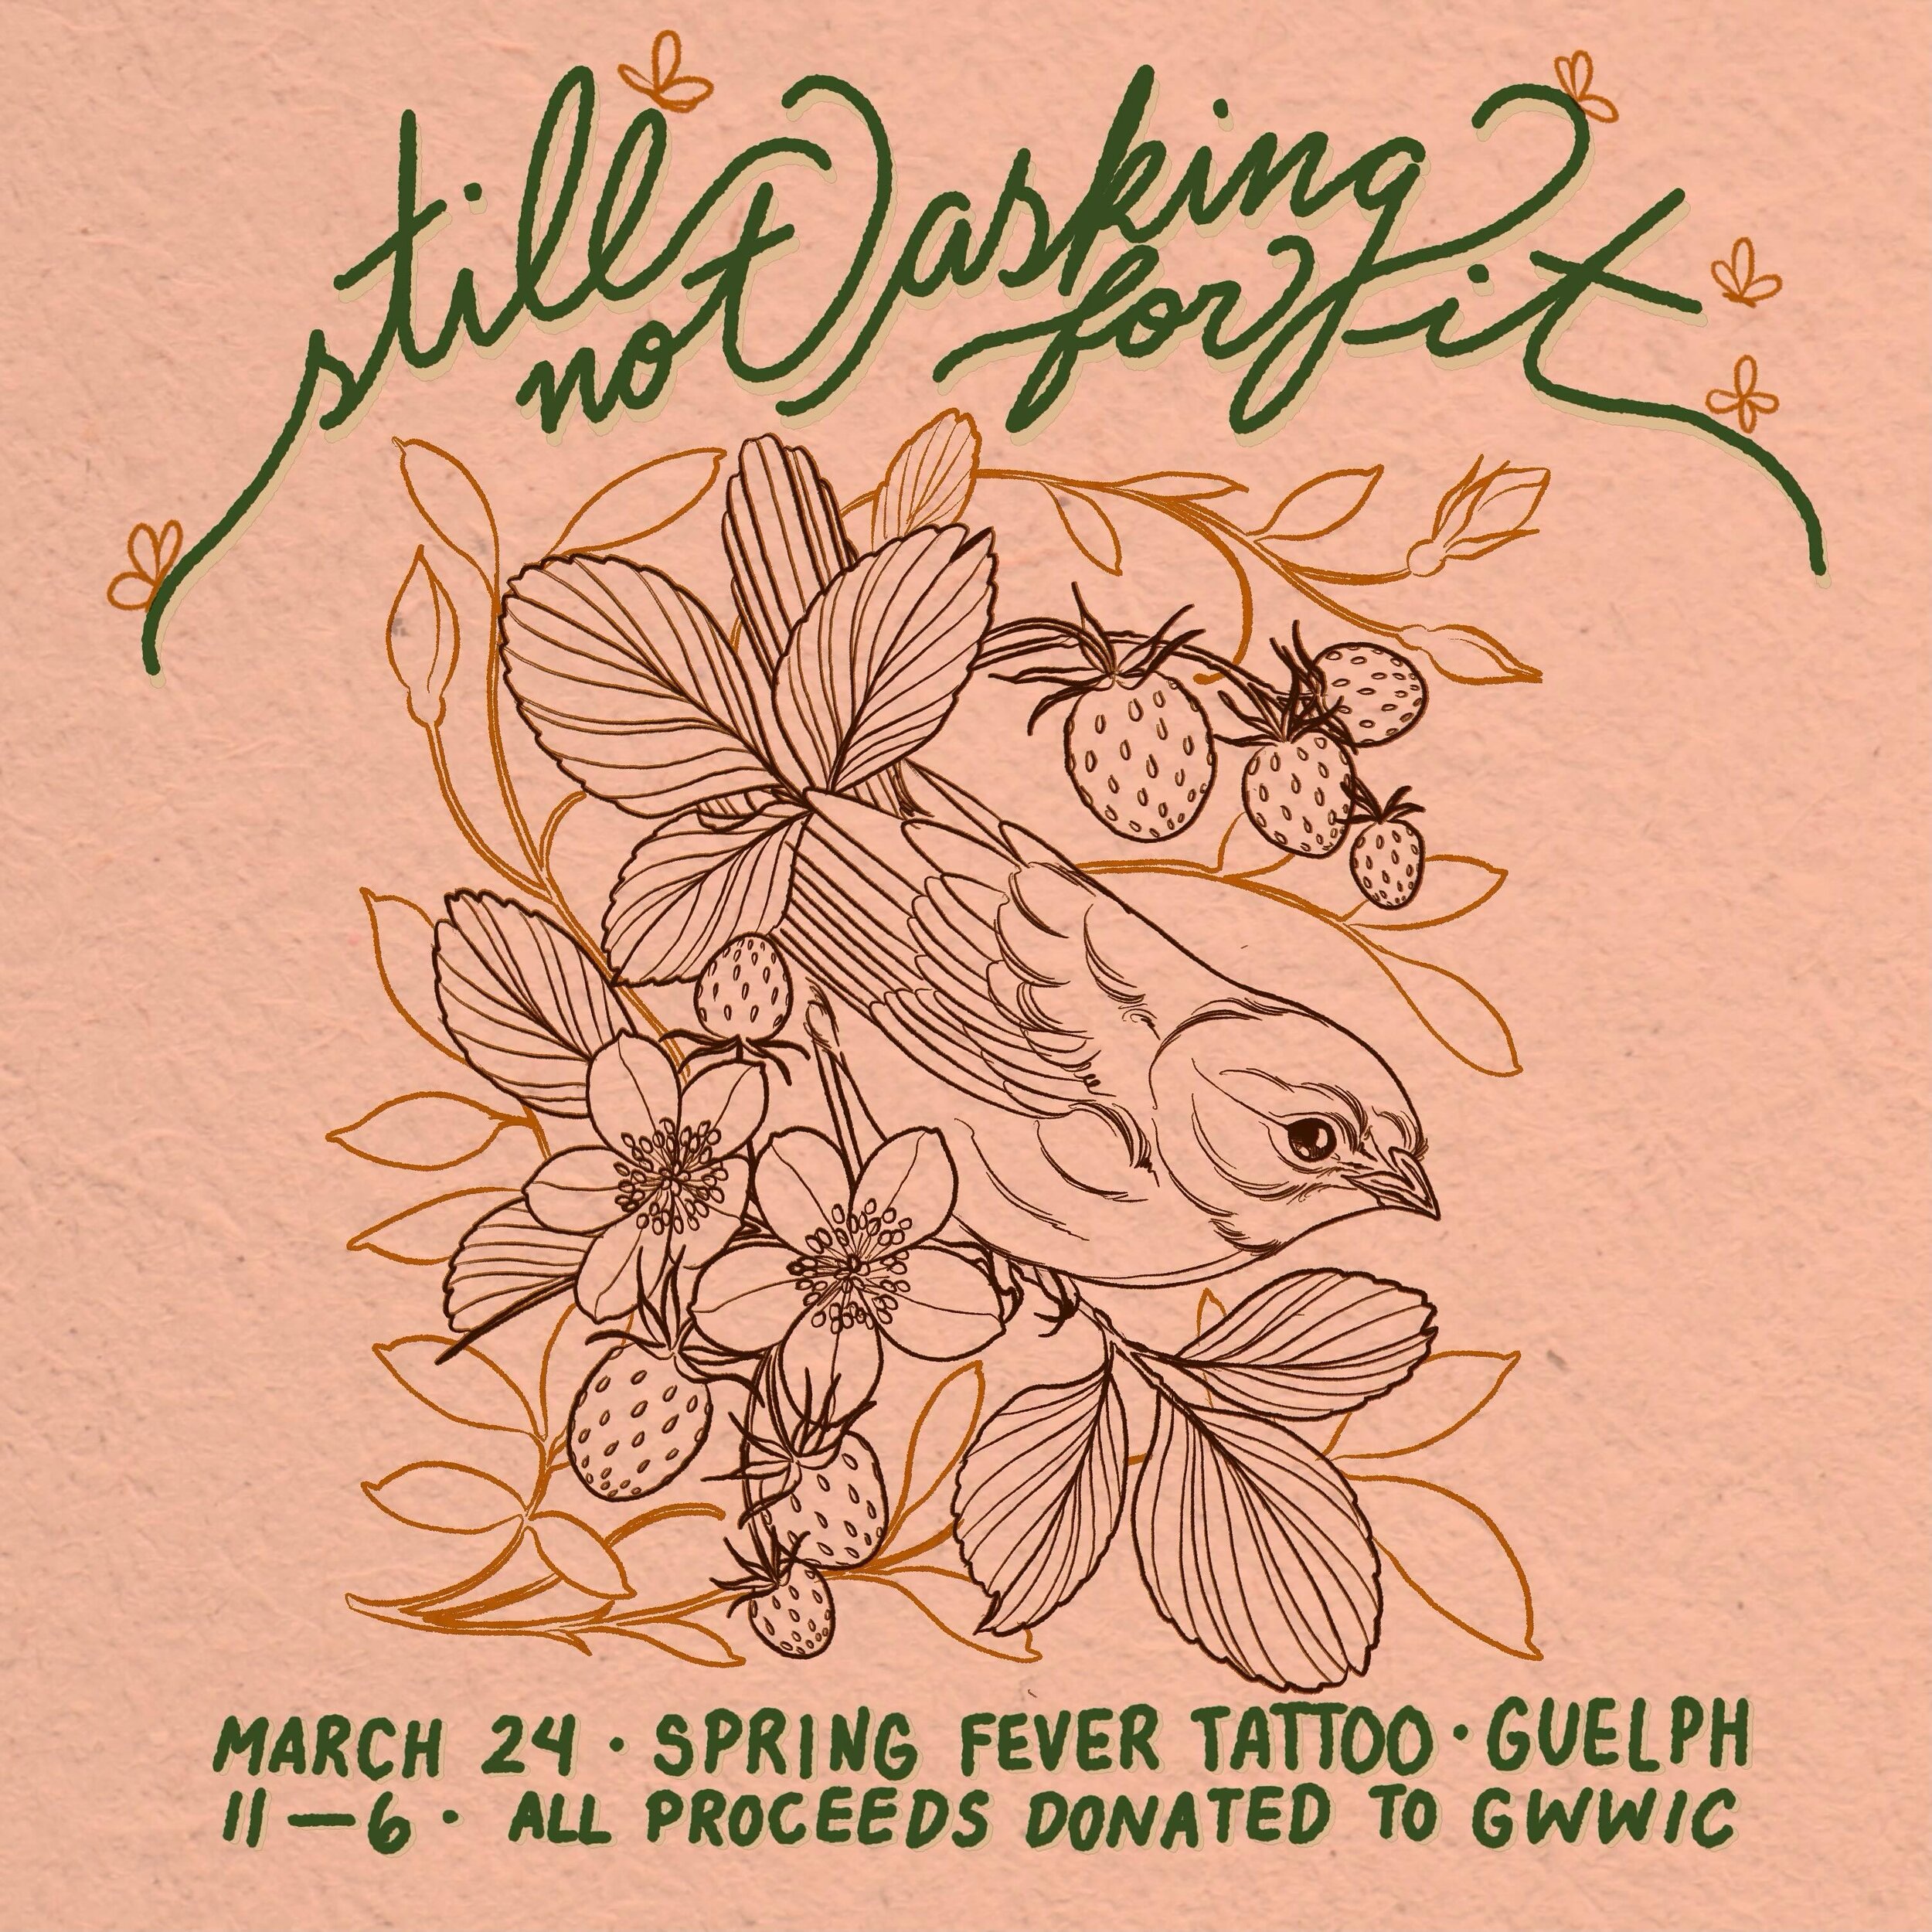 So excited to share that we @springfevertattoo are participating in the @stillnotaskingforit_flashevent this Sunday March 24th!

As we&rsquo;ve done for previous years, 100% of our proceeds will be donated to Guelph-Wellington Women in Crisis @gwwic 